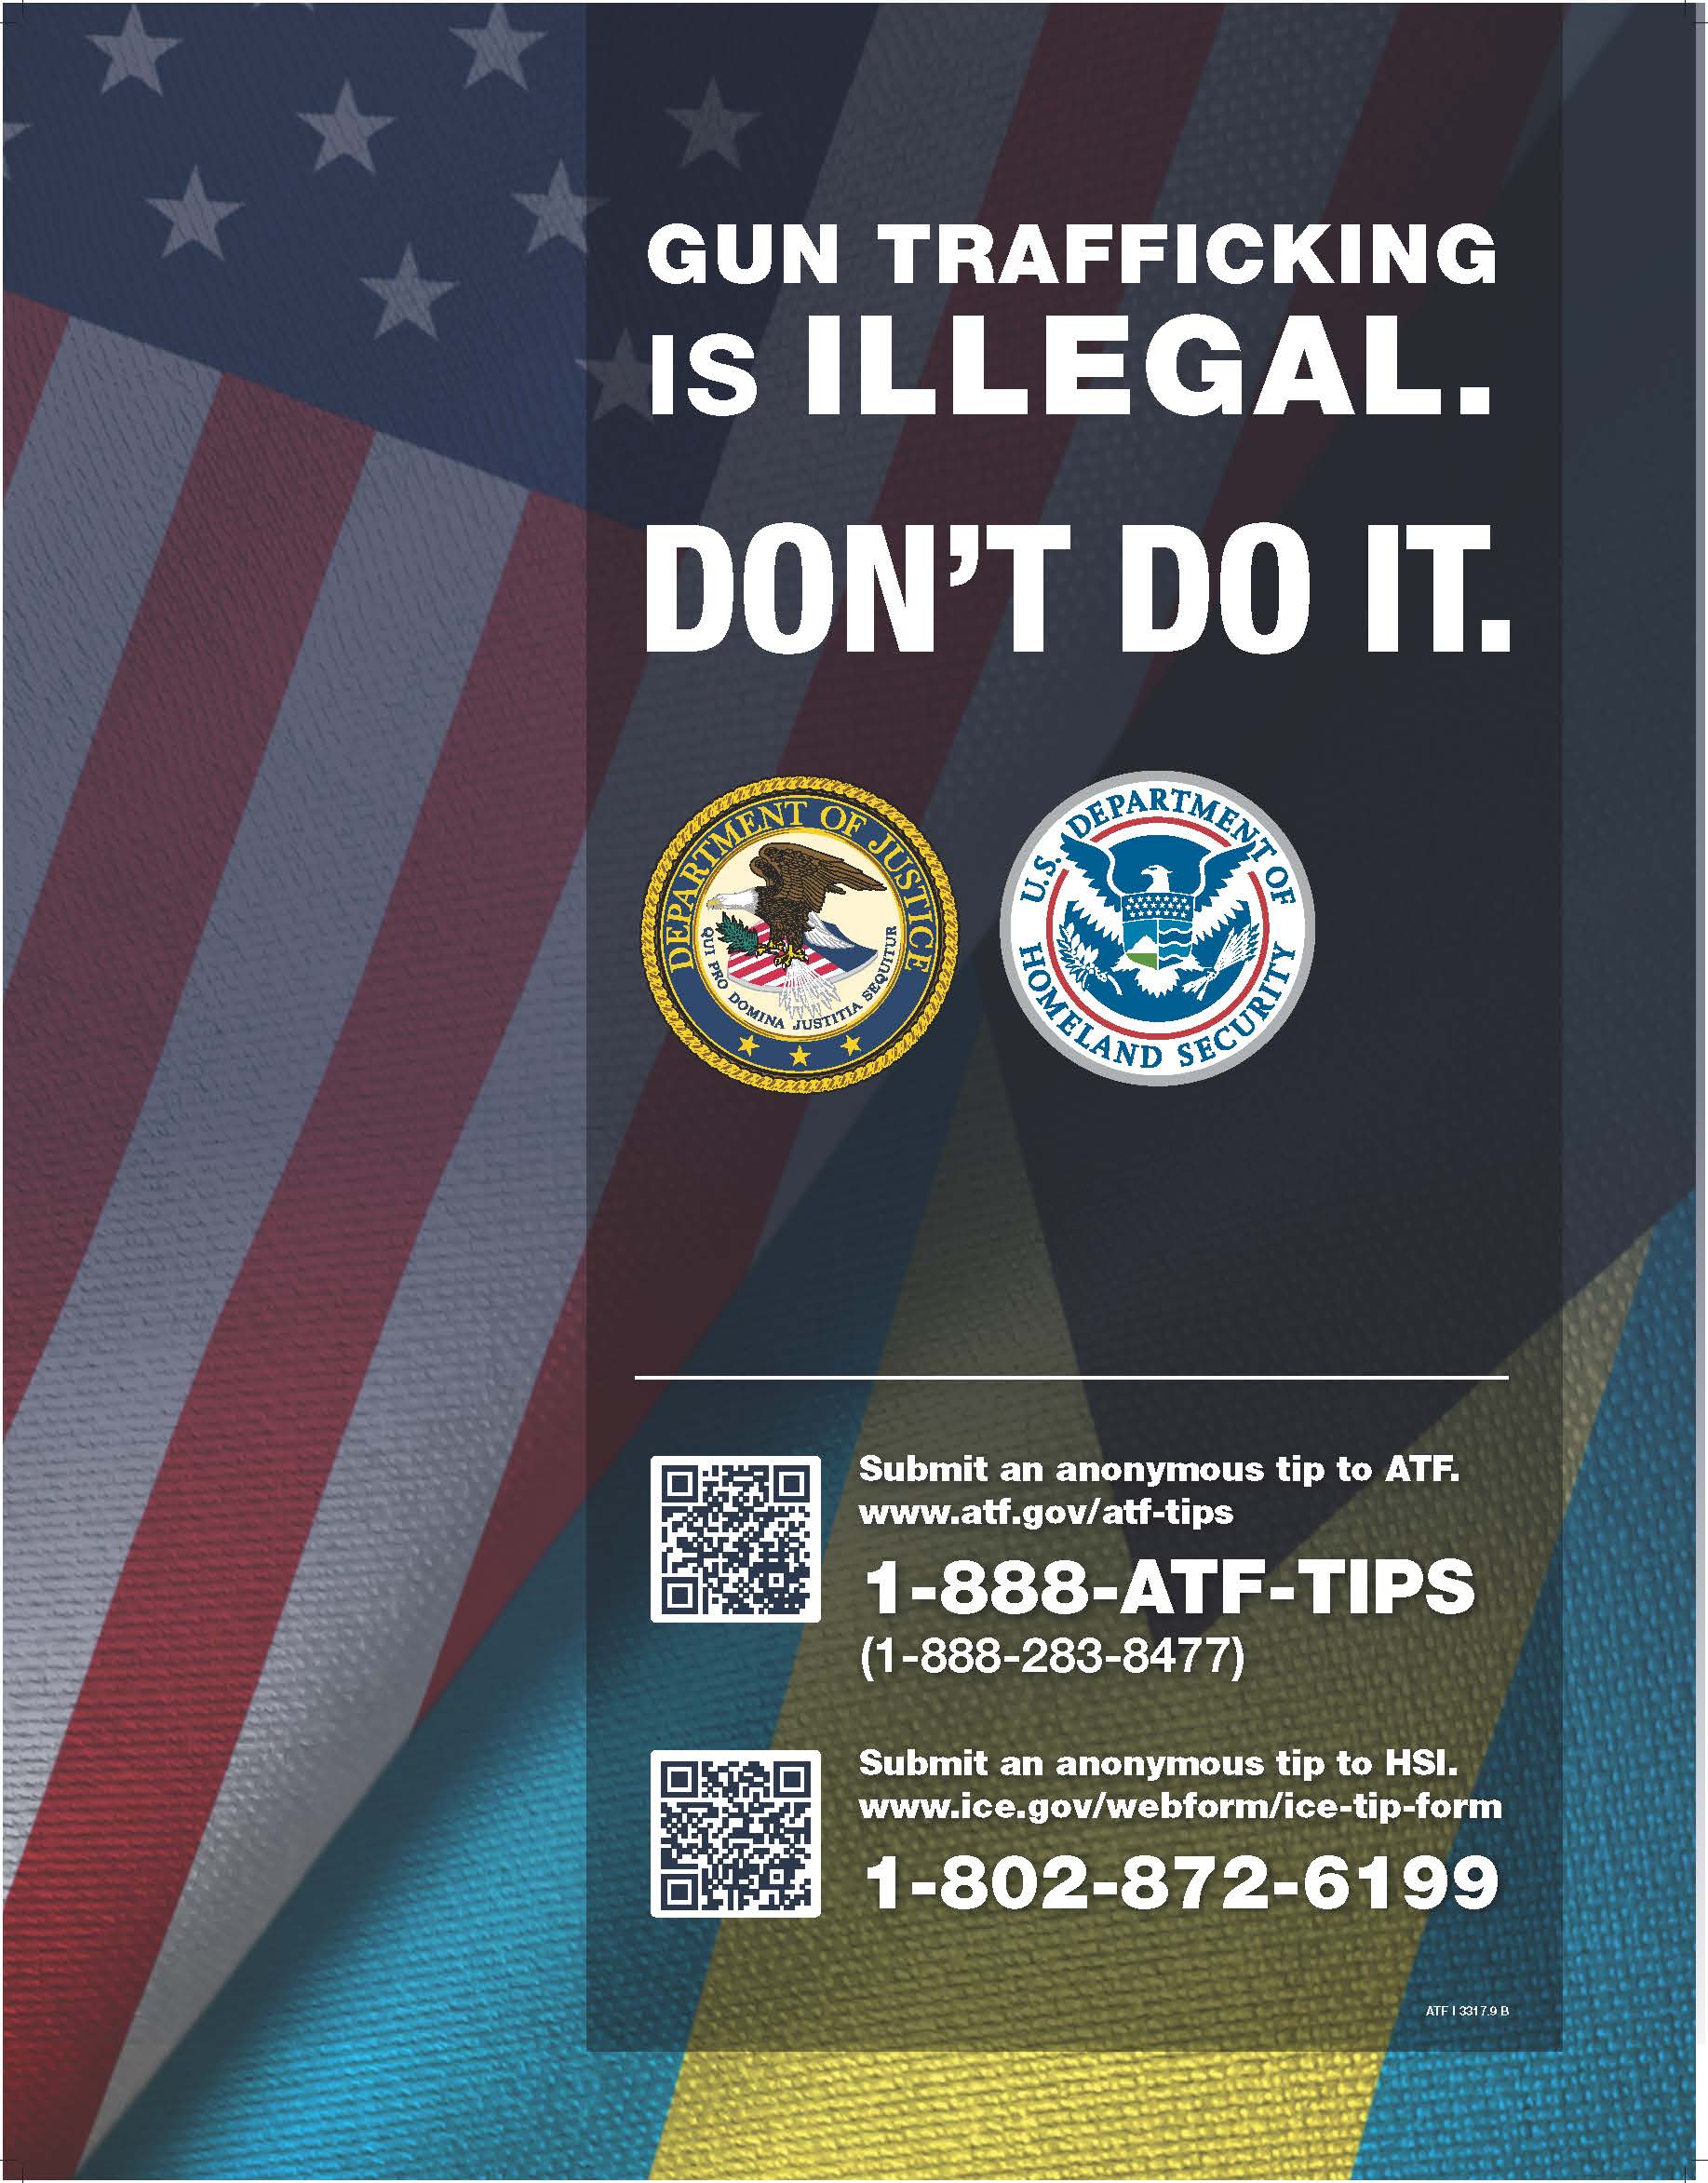 ATF I 3317.9 B CARICOM Anti-Firearms Trafficking Campaign Poster: American and Bahamian flags waving together